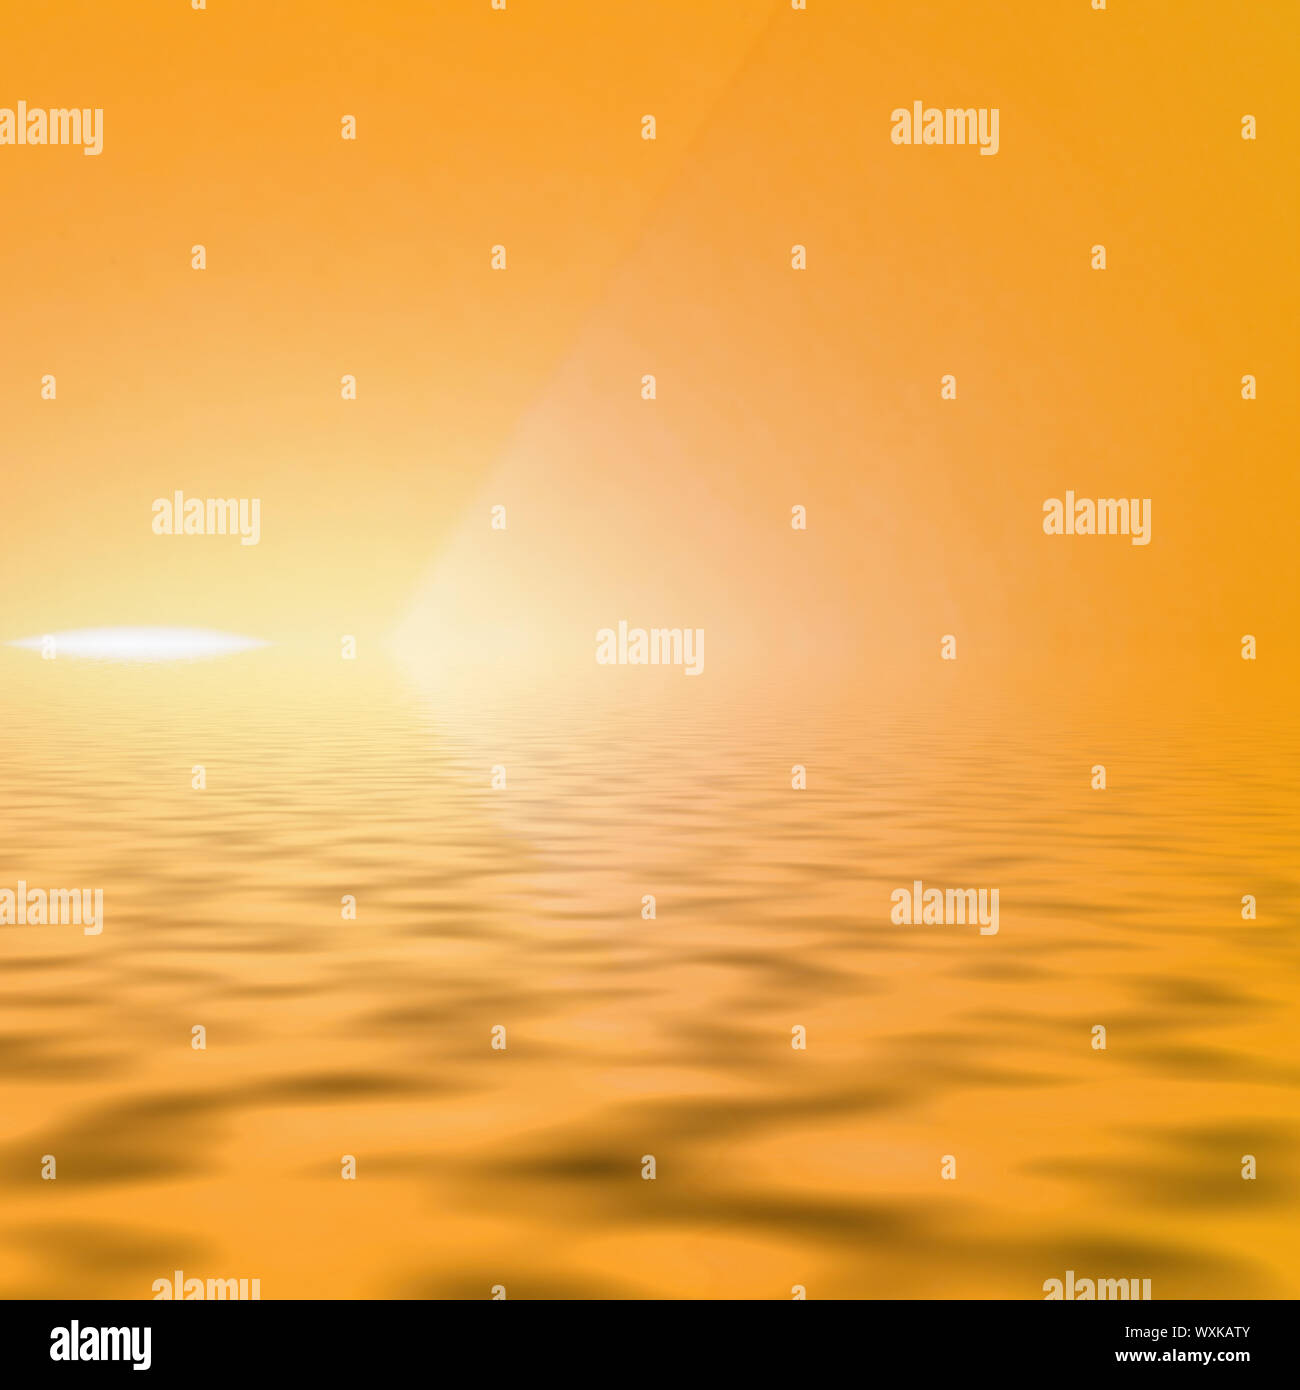 Bright golden shiny background with blurred ripples and diminishing perspective Stock Photo